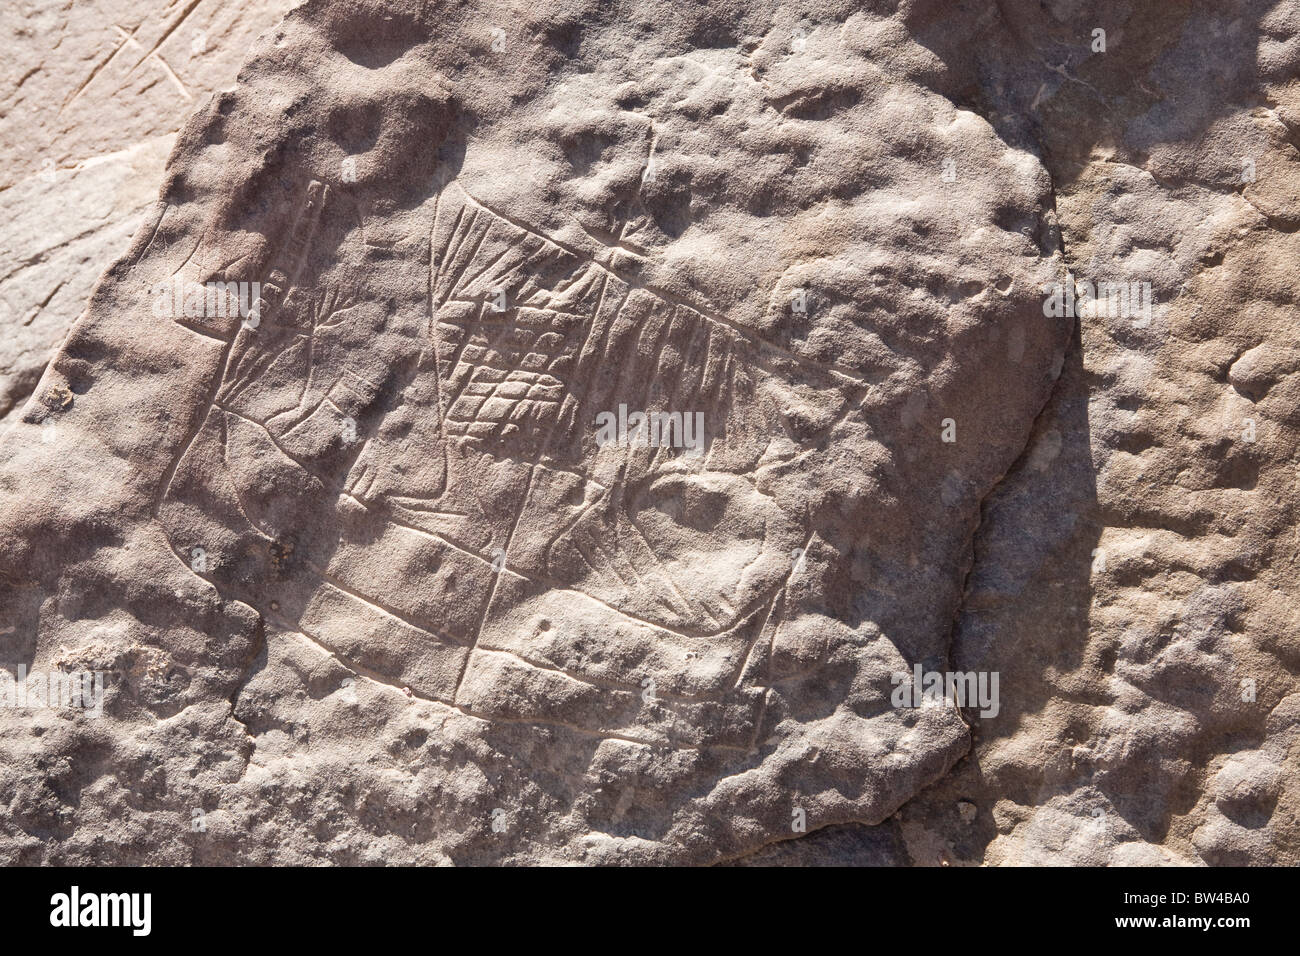 Petroglyph of boat with large sail in Wadi Mineh, in the Eastern Desert of Egypt Stock Photo